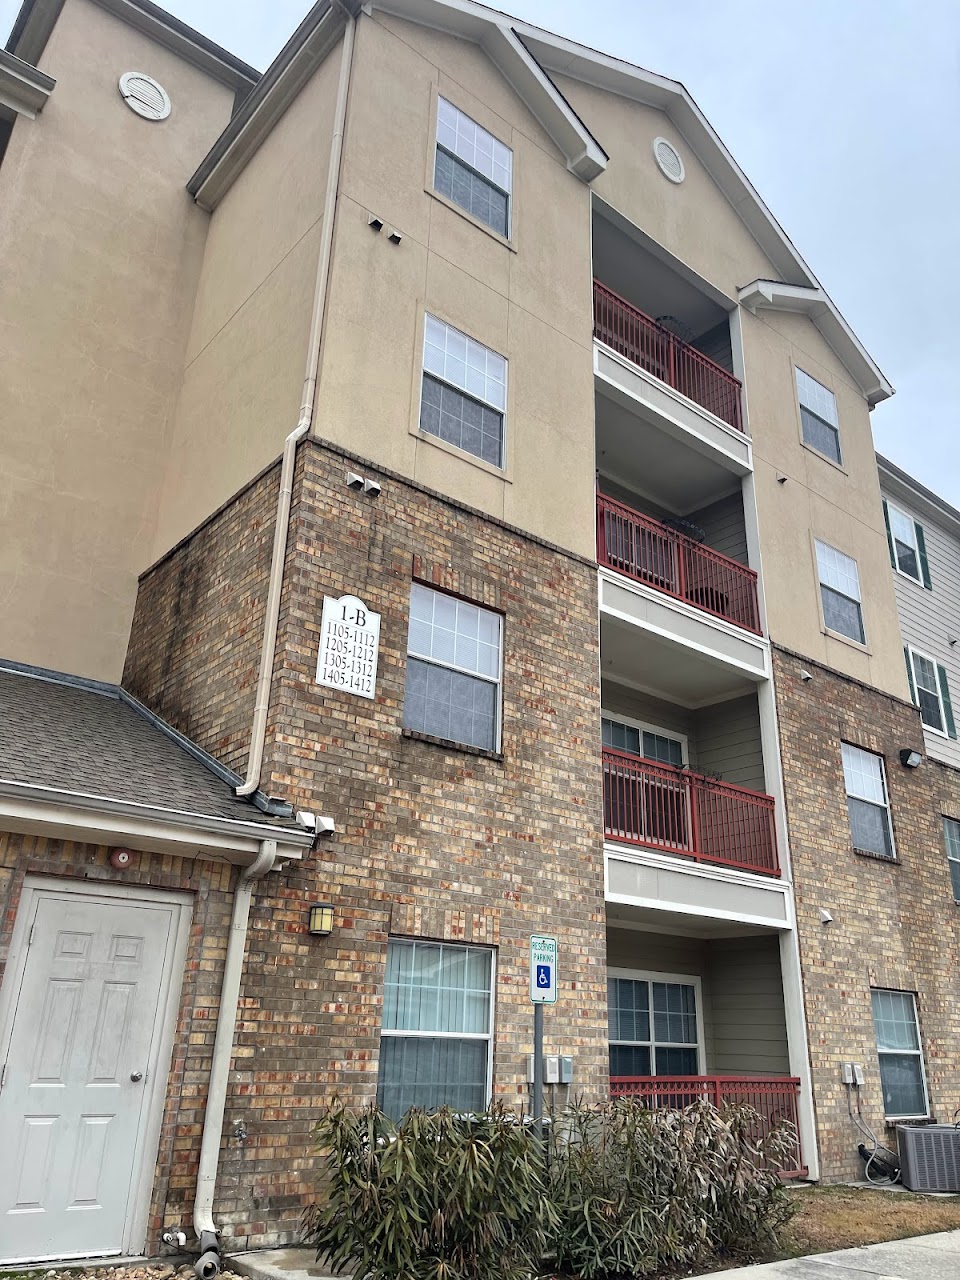 Photo of KNIGHTSBRIDGE. Affordable housing located at 3455 1960 EAST HUMBLE, TX 77338